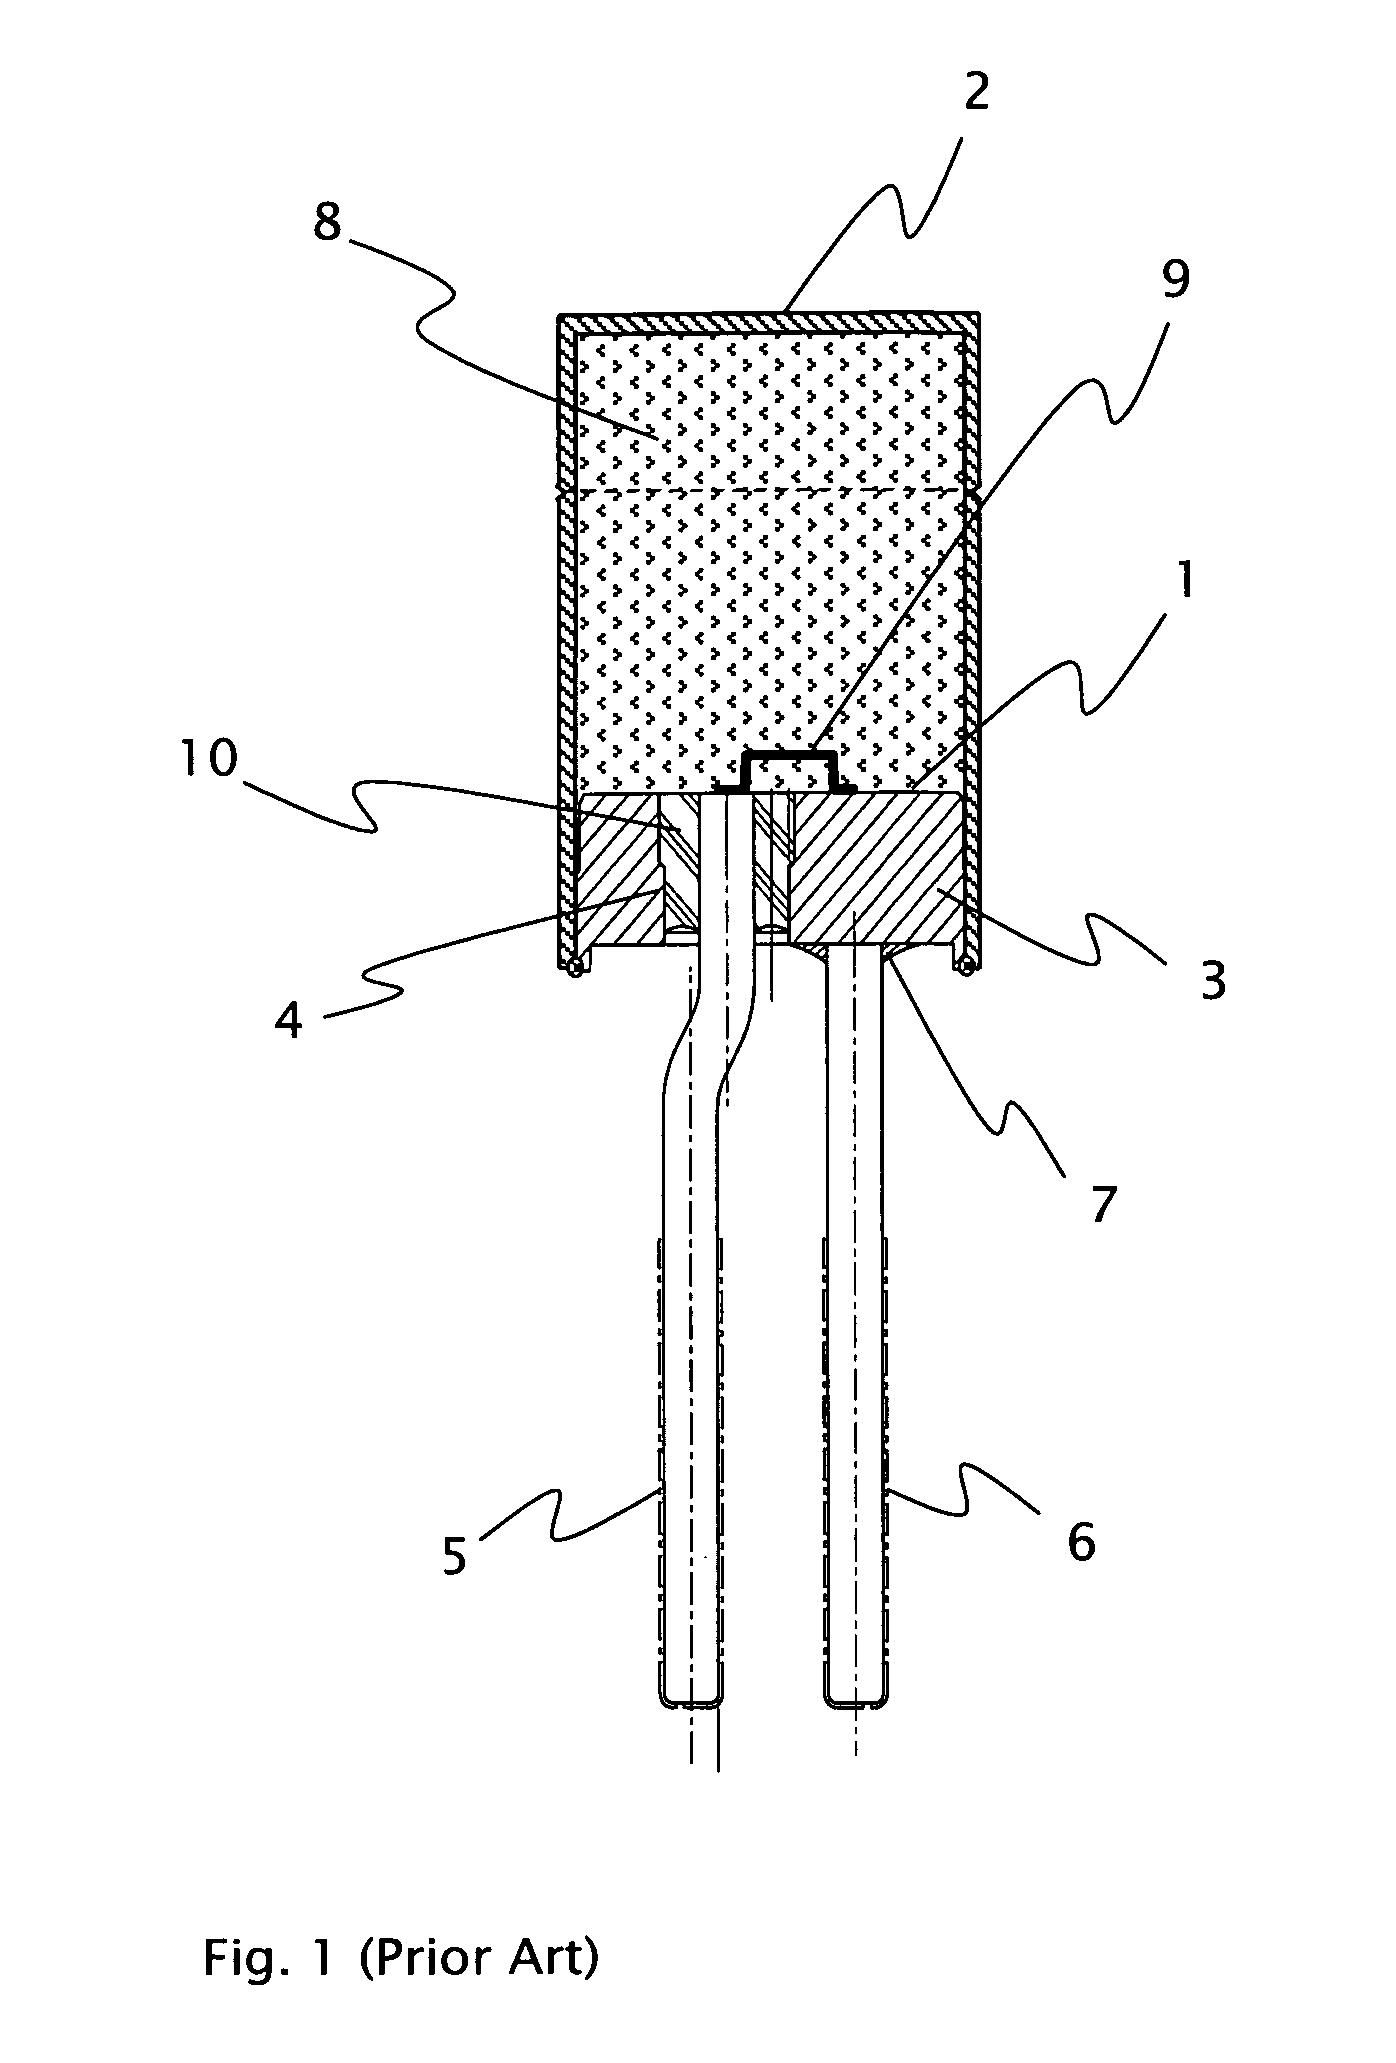 Shaped feed-through element with contact rod soldered in